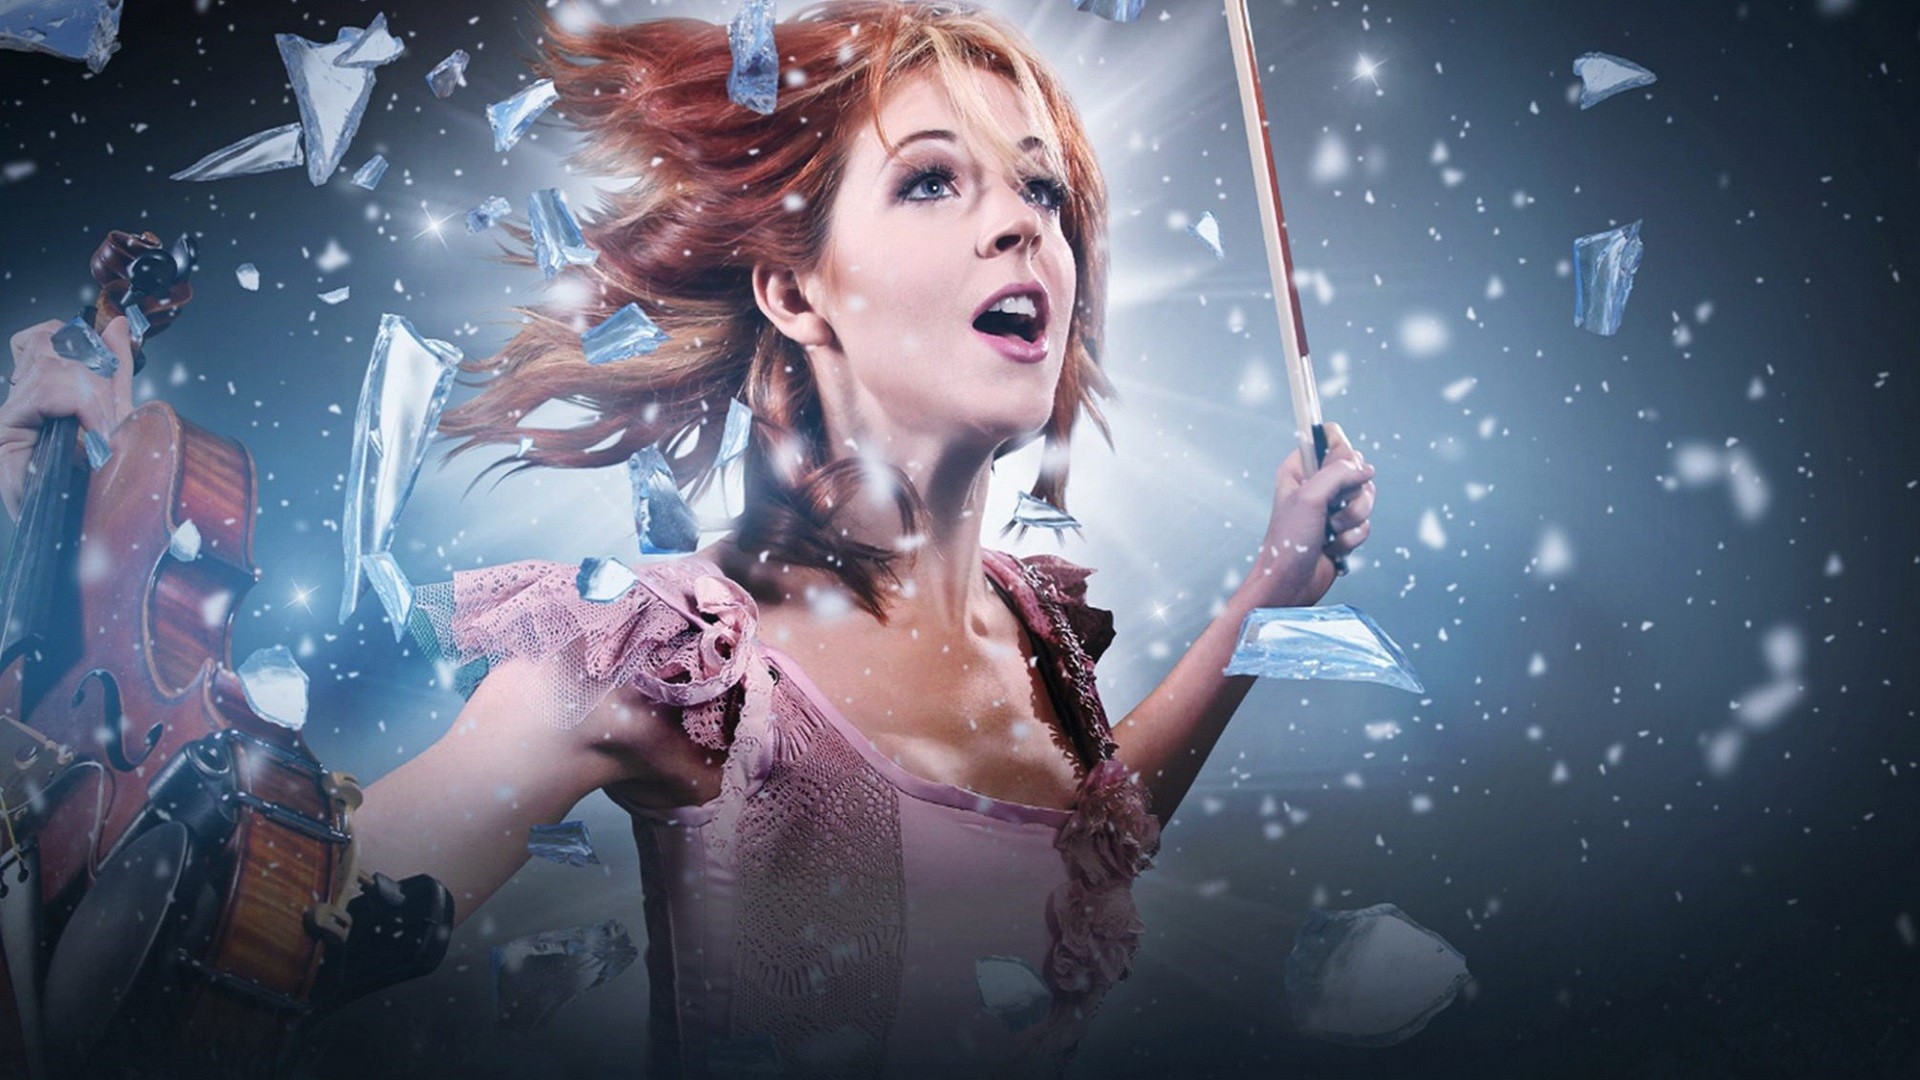 People 1920x1080 Lindsey Stirling women redhead singer violin music celebrity open mouth musical instrument